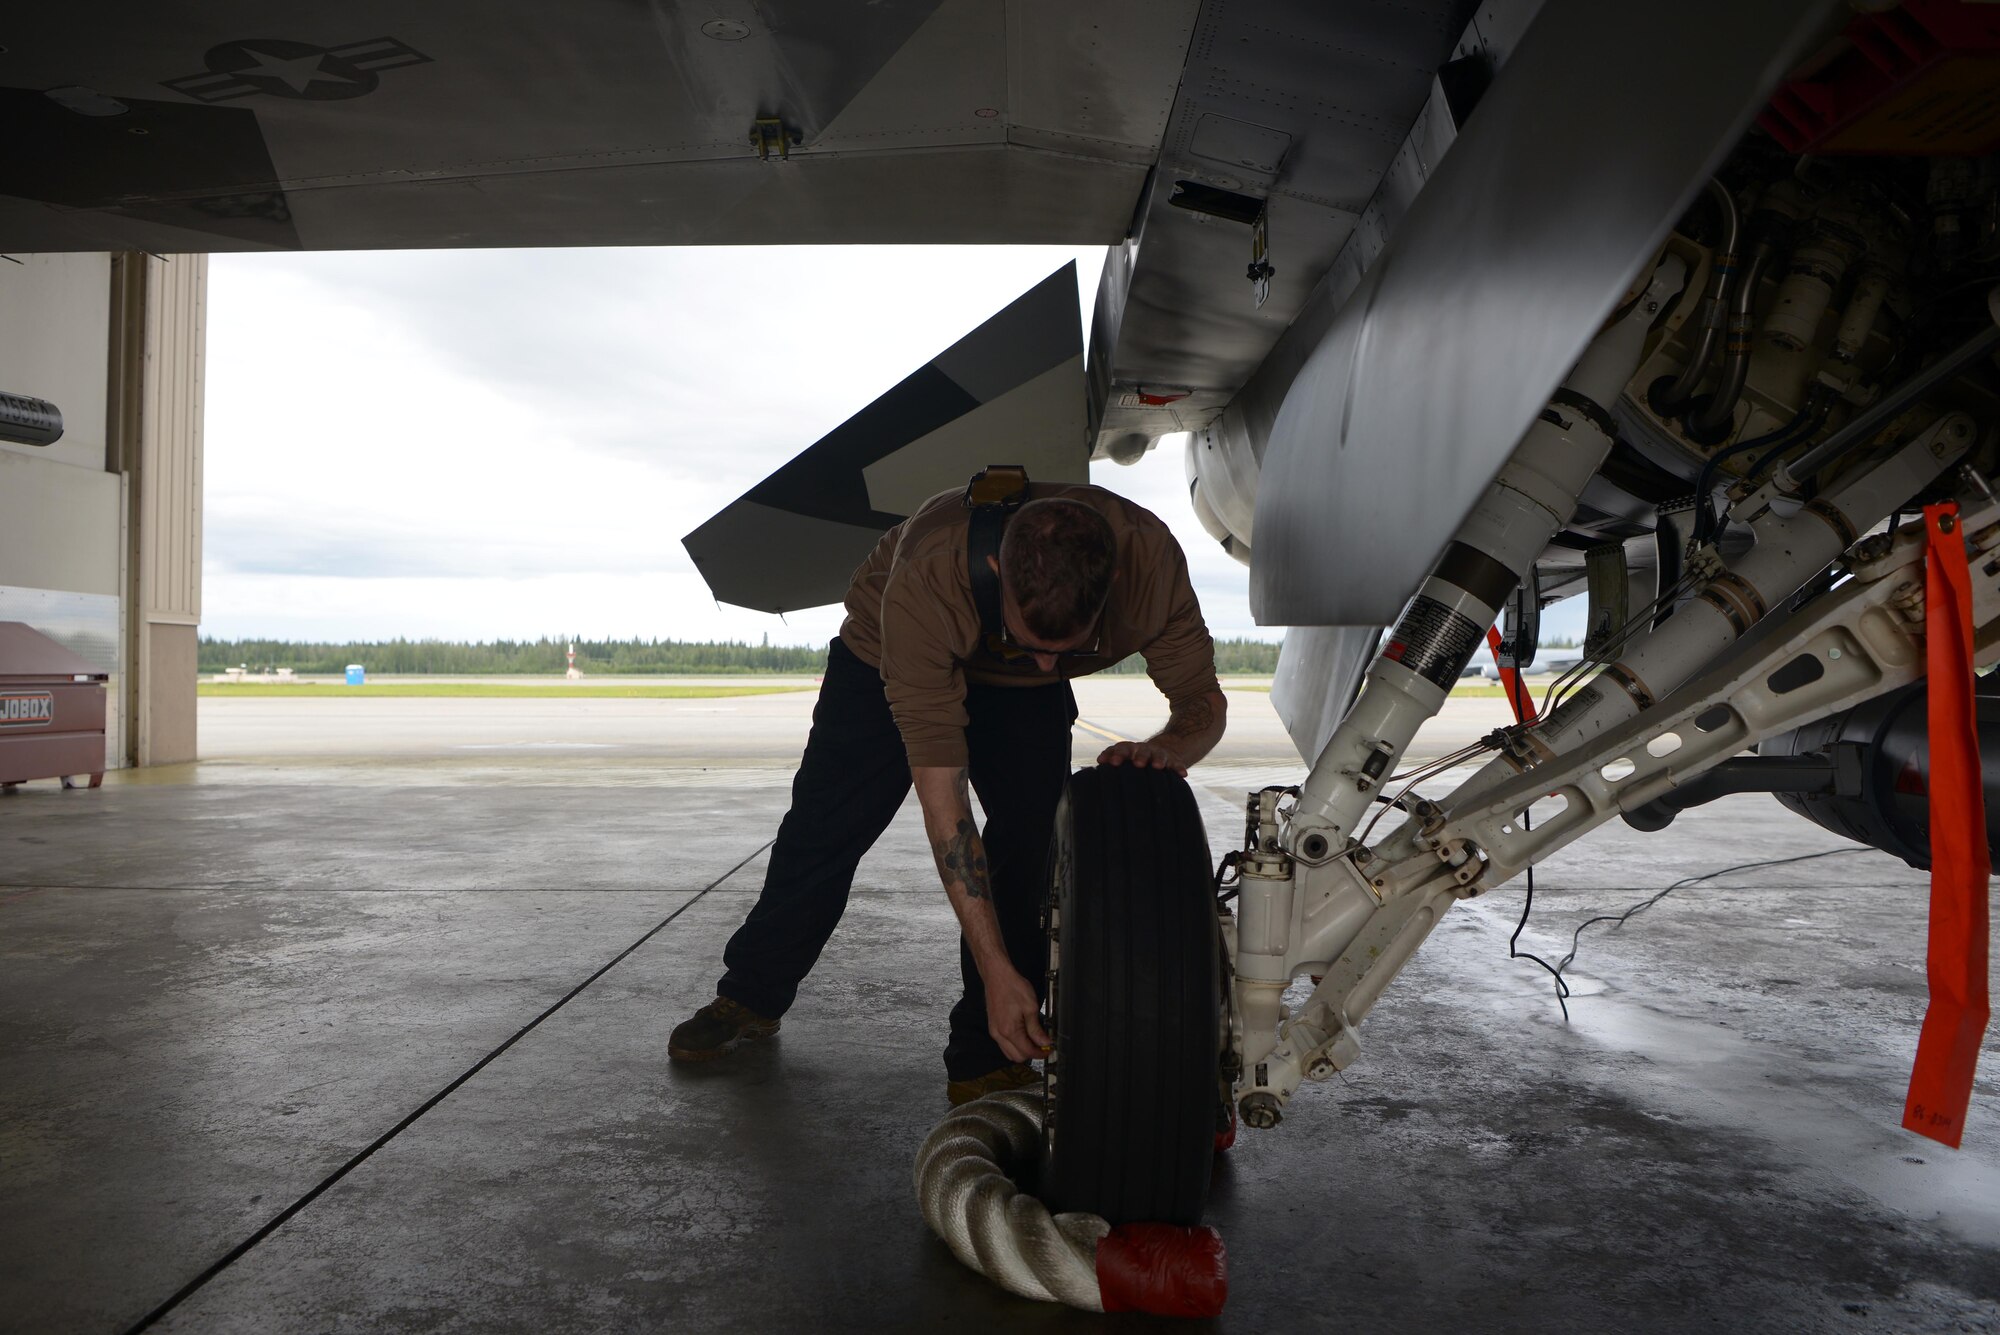 U.S. Air Force Senior Airman Joshua Zacharko, an 18th Aircraft Maintenance Unit (AMU) crew chief, inspects landing gear on an F-16 Fighting Falcon aircraft during RED FLAG-Alaska 20-3 on Eielson Air Force Base, Alaska, Aug. 4, 2020. The 18th AMU provides mission-ready maintainers to support the wing's aggressor missions and exercises throughout the Indo-Pacific region. (U.S. Air Force photo by Senior Airman Beaux Hebert)